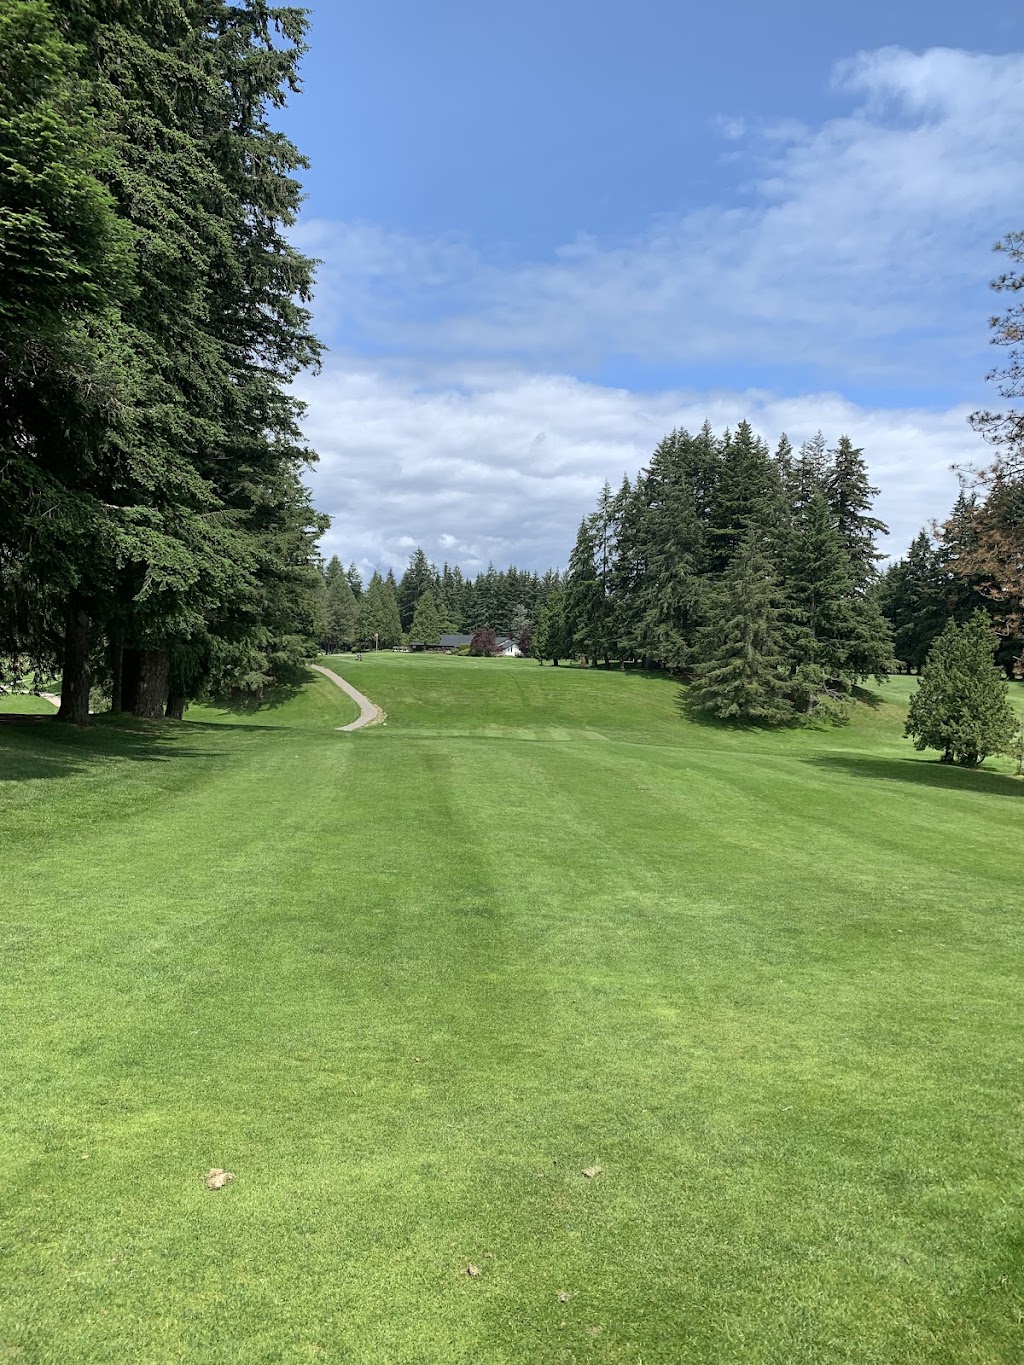 The Hills at Portal Golf Club (formerly Peace Portal) | cafe | 16900 4 Ave, Surrey, BC V3Z 9P6, Canada | 6045384818 OR +1 604-538-4818